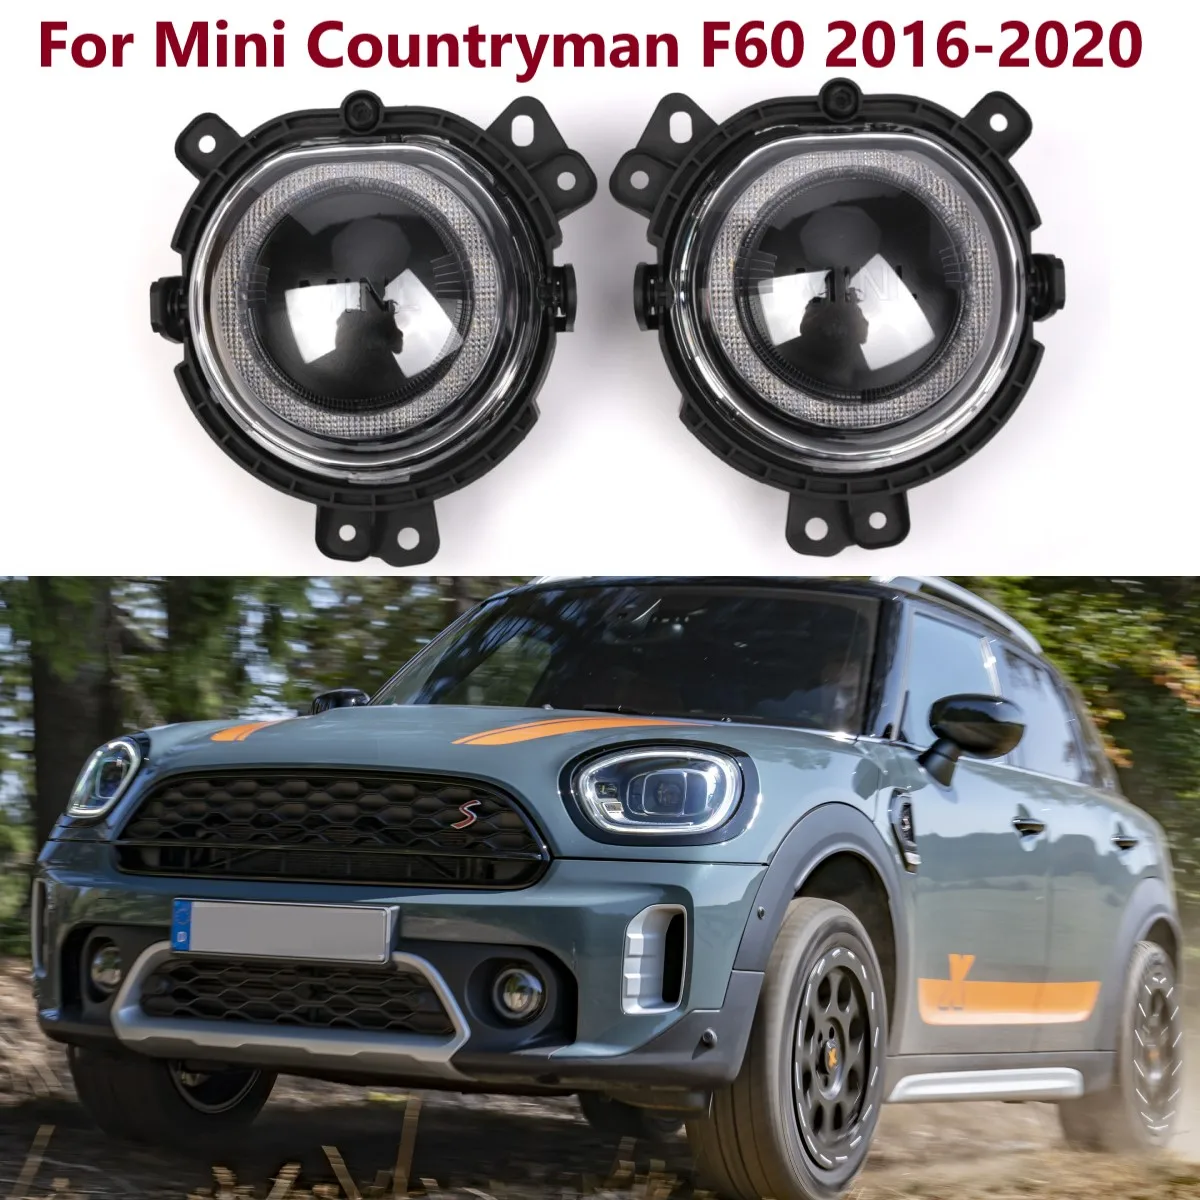 

Left Right Car LED Fog Lamp Foglight Daytime Running Lights Replacement Parts For Mini Countryman F60 2016 2017 2018 2019 2020